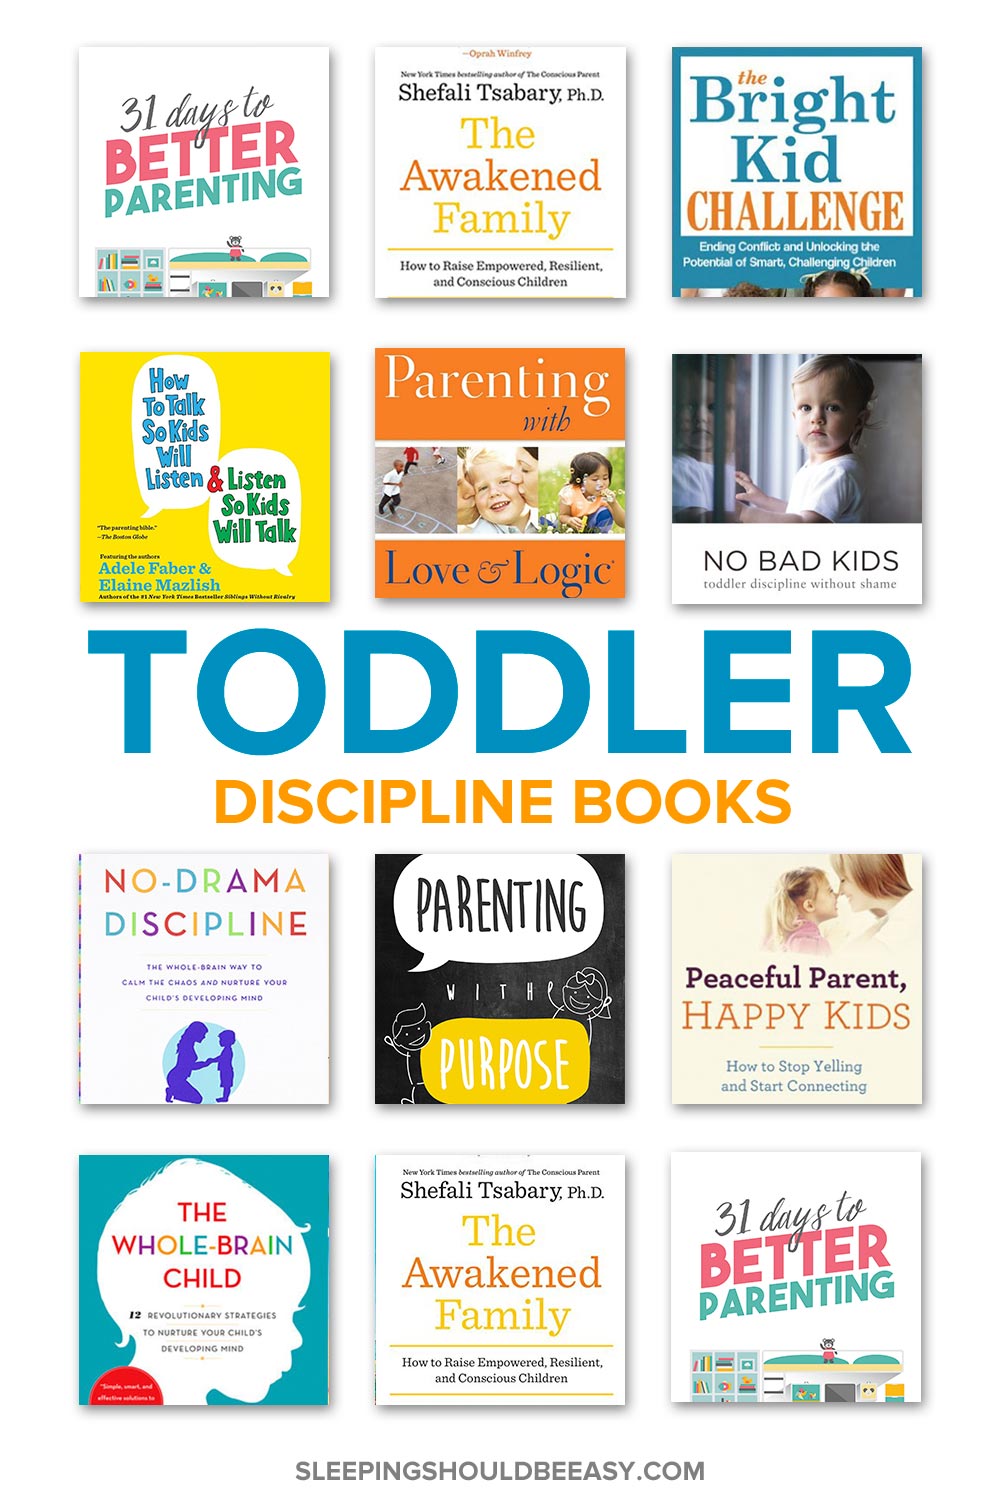 Top 10 Toddler Discipline Books to Get Your Child to Listen